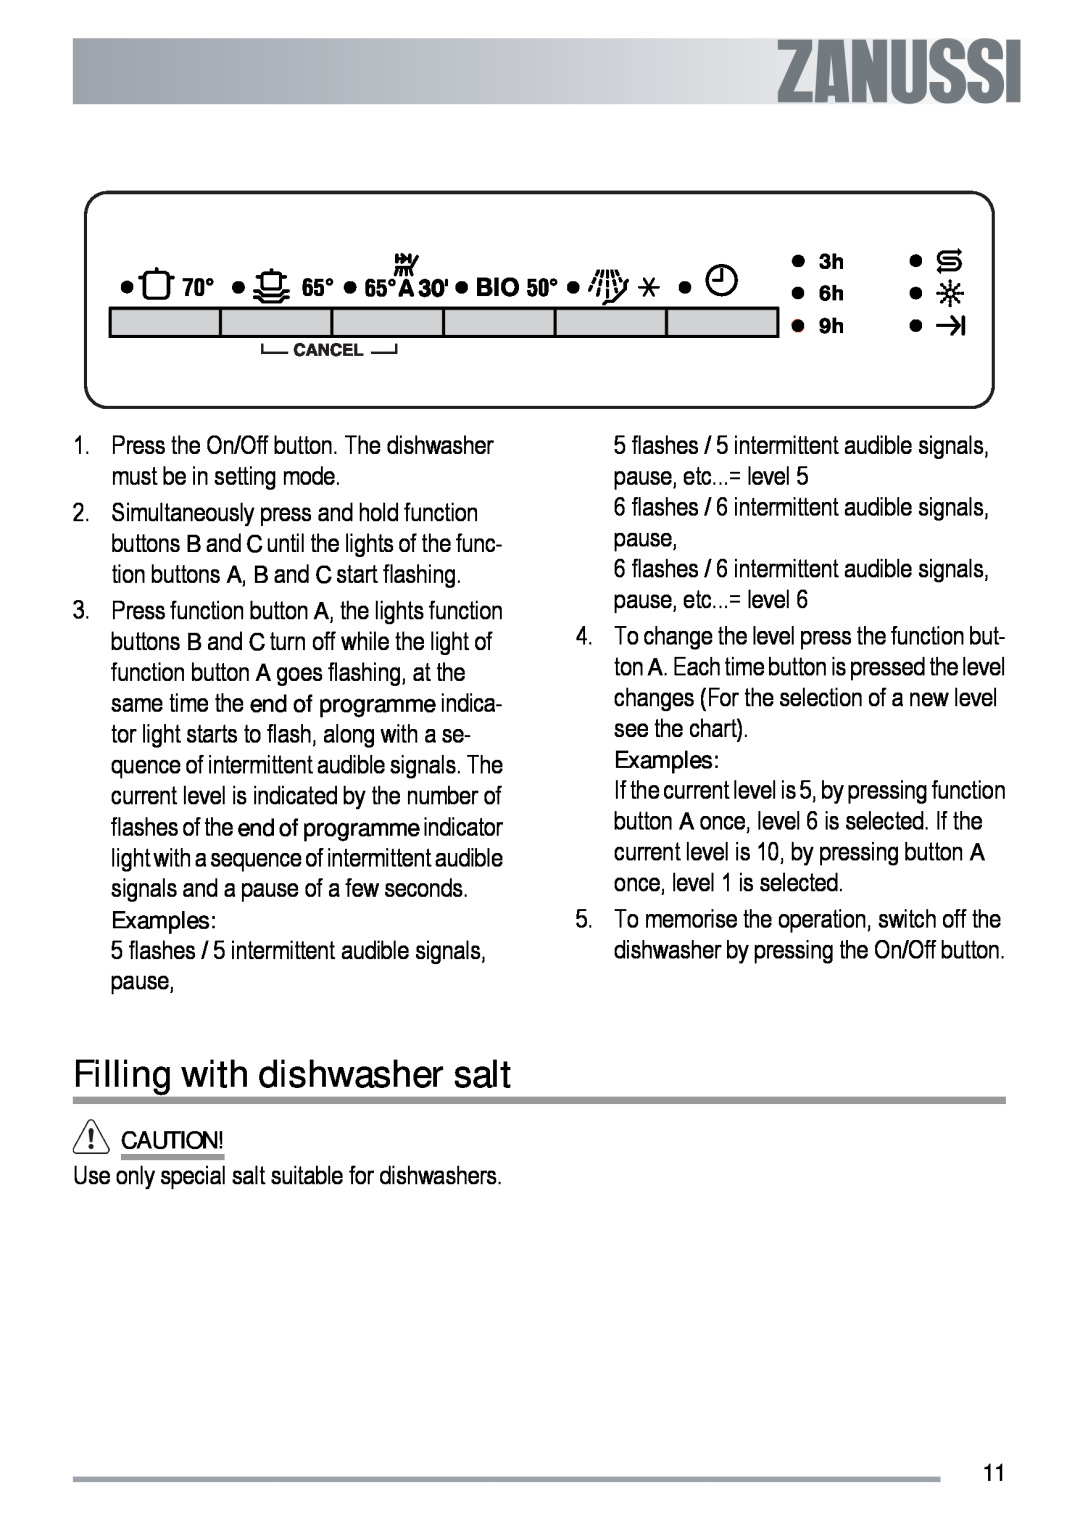 Zanussi ZDT 6454 user manual Filling with dishwasher salt, Examples 